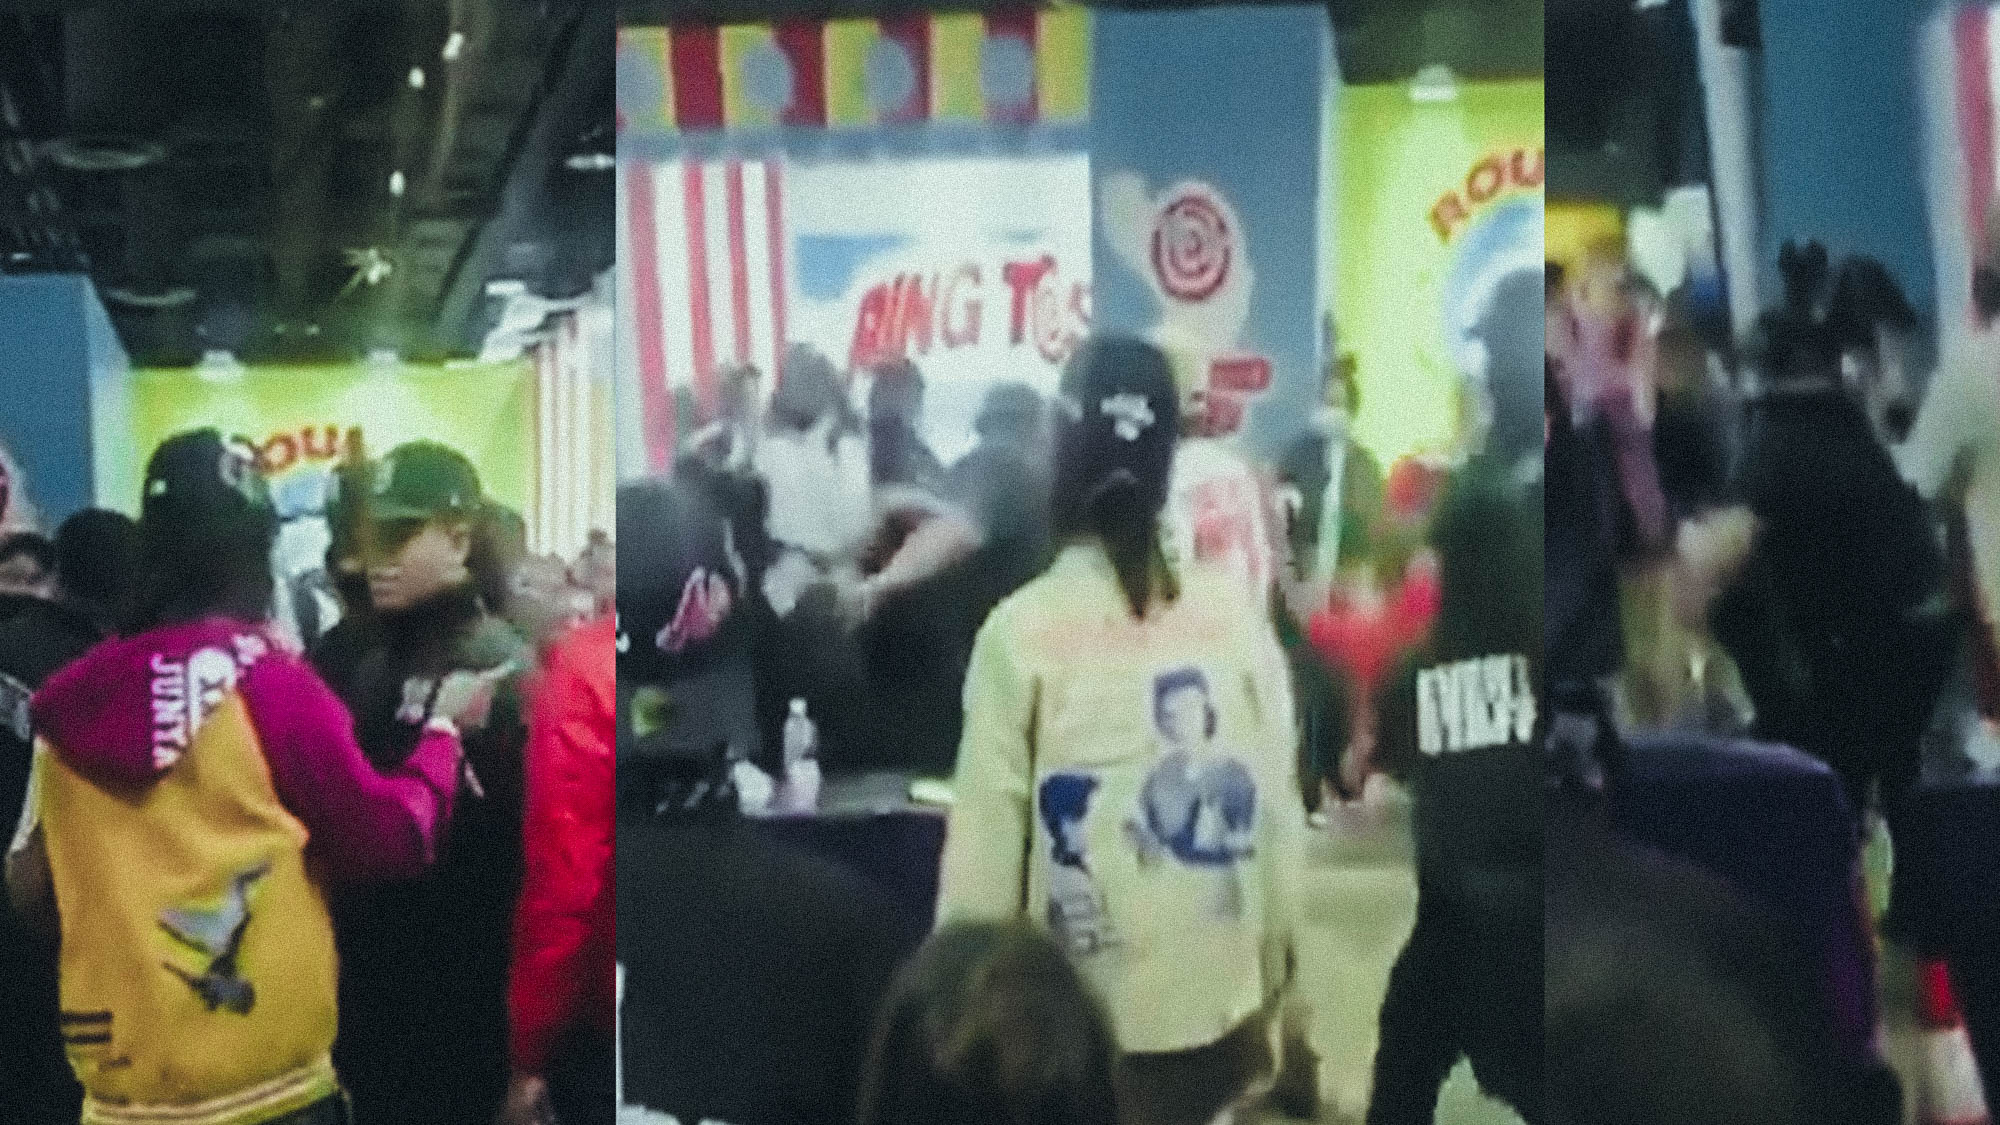 Offset from Migos get into a fight at ComplexCon event